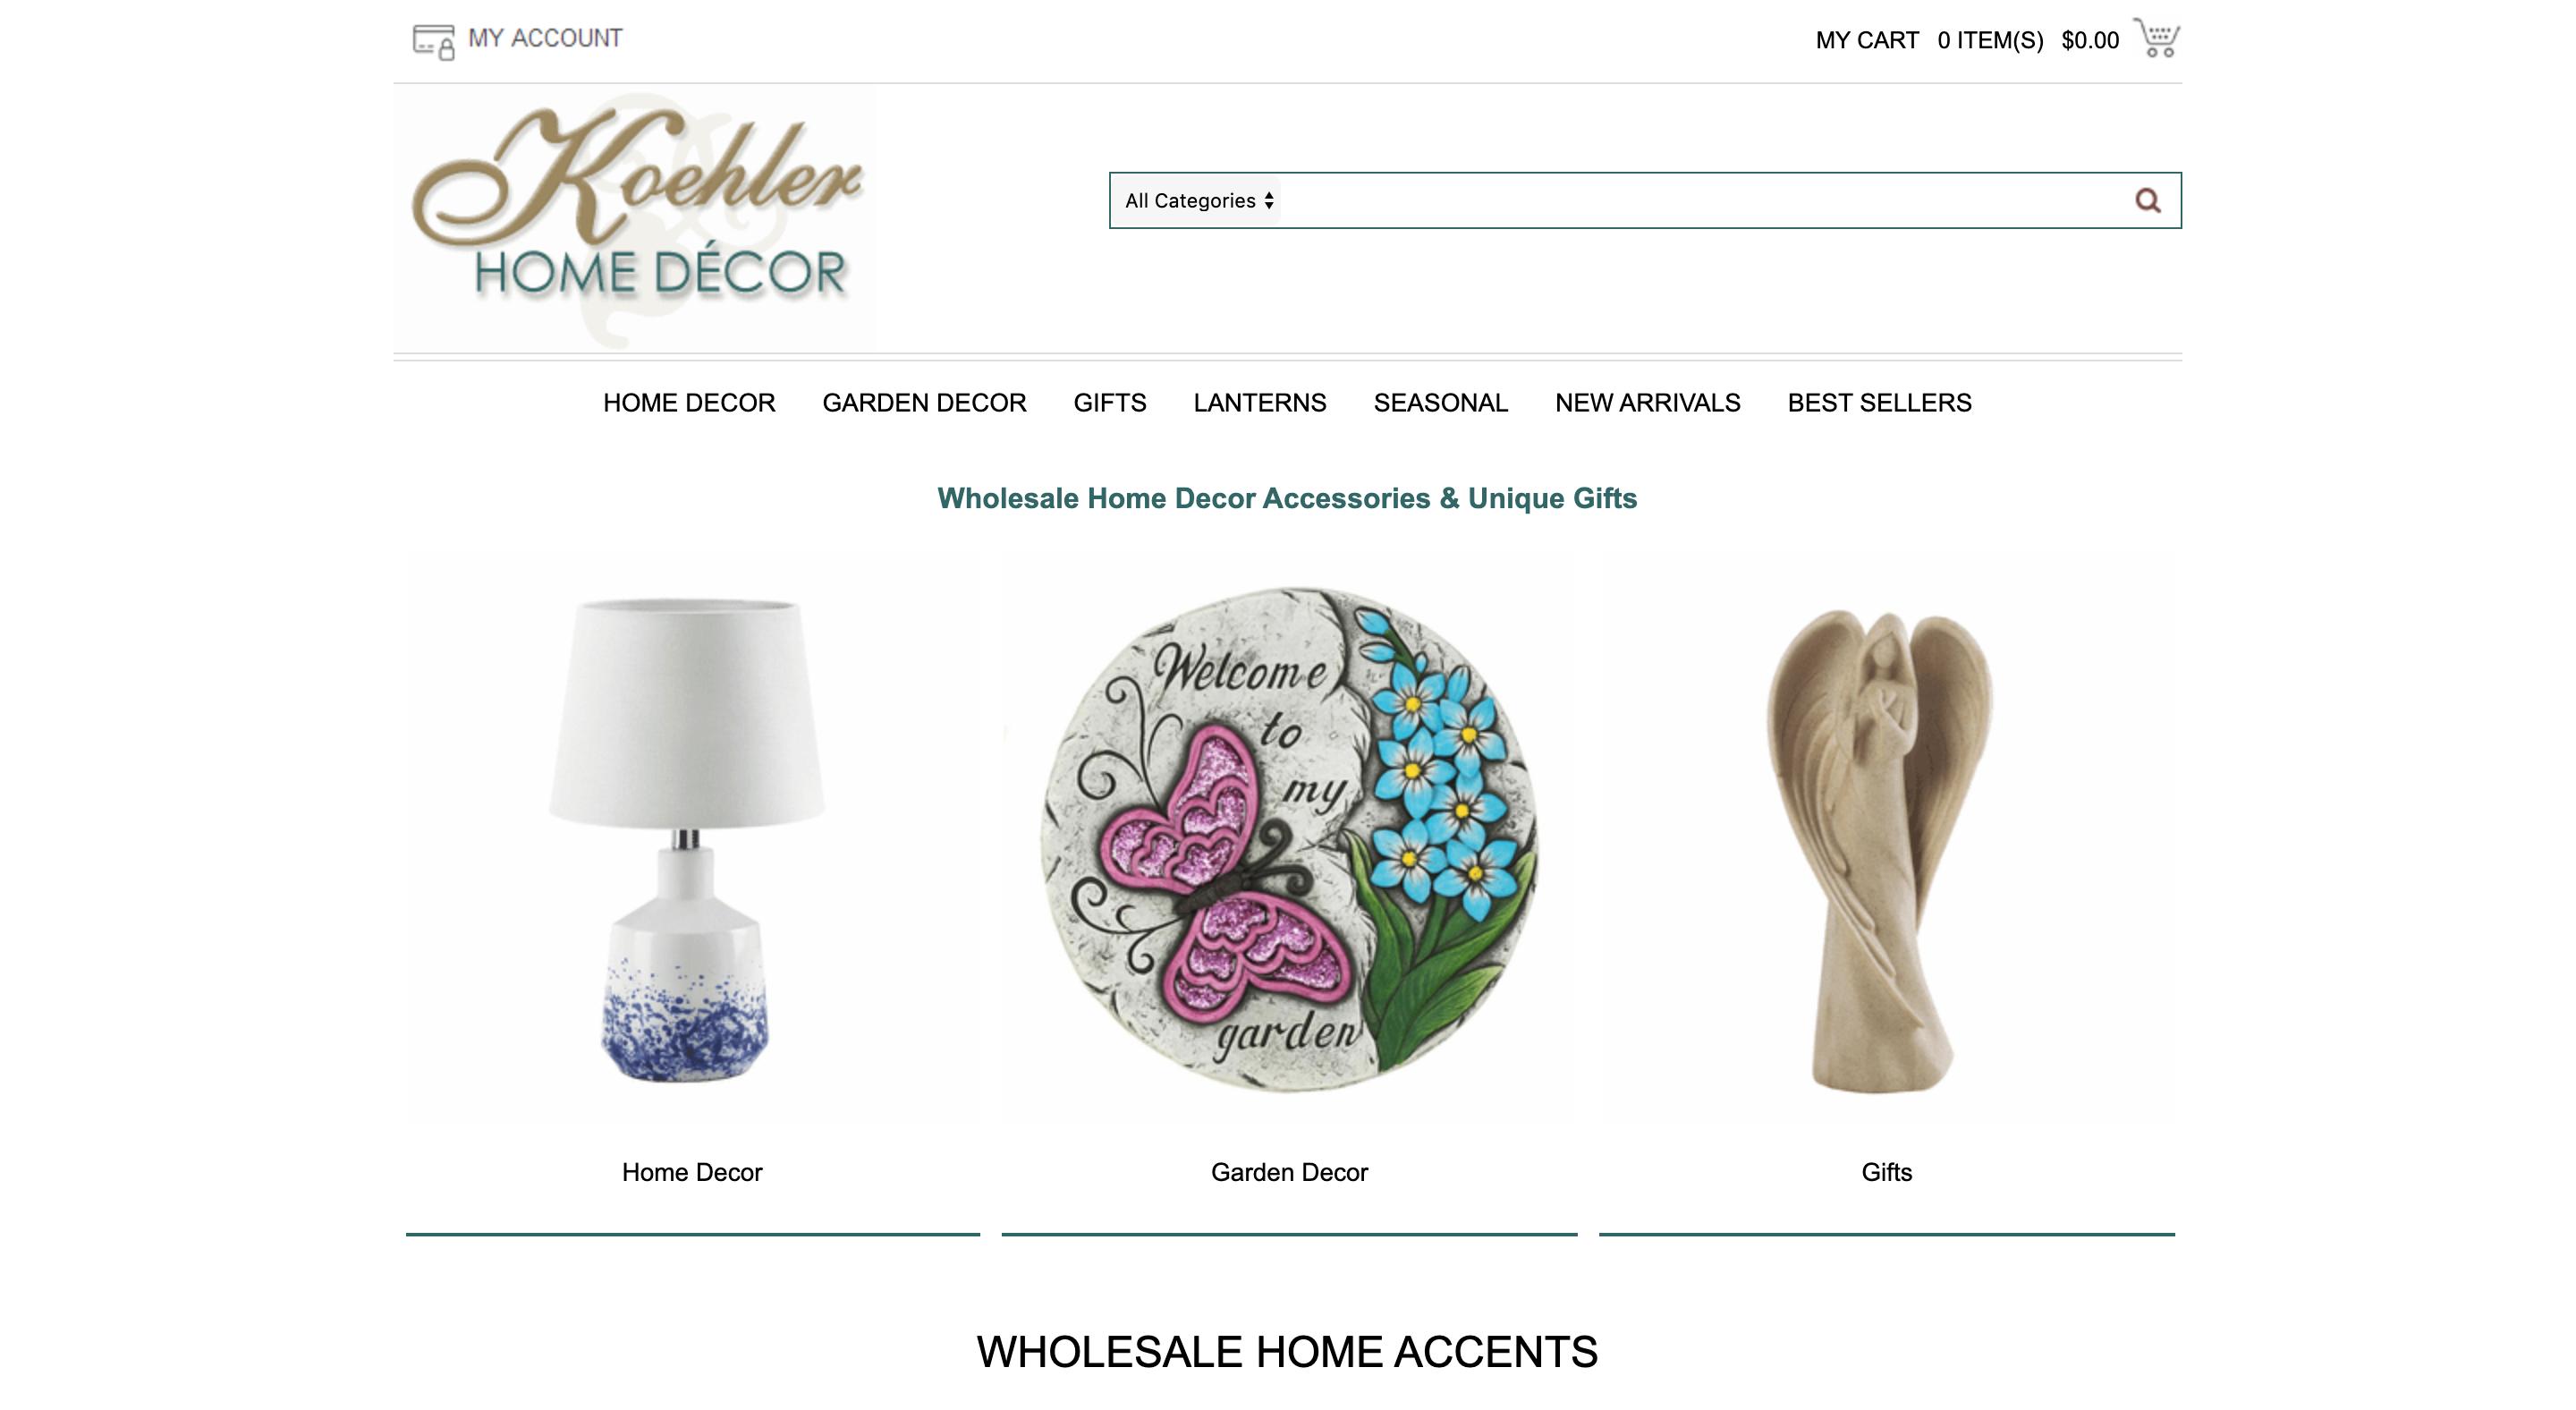 Koehler Home Decor dropshipping suppliers in the USA